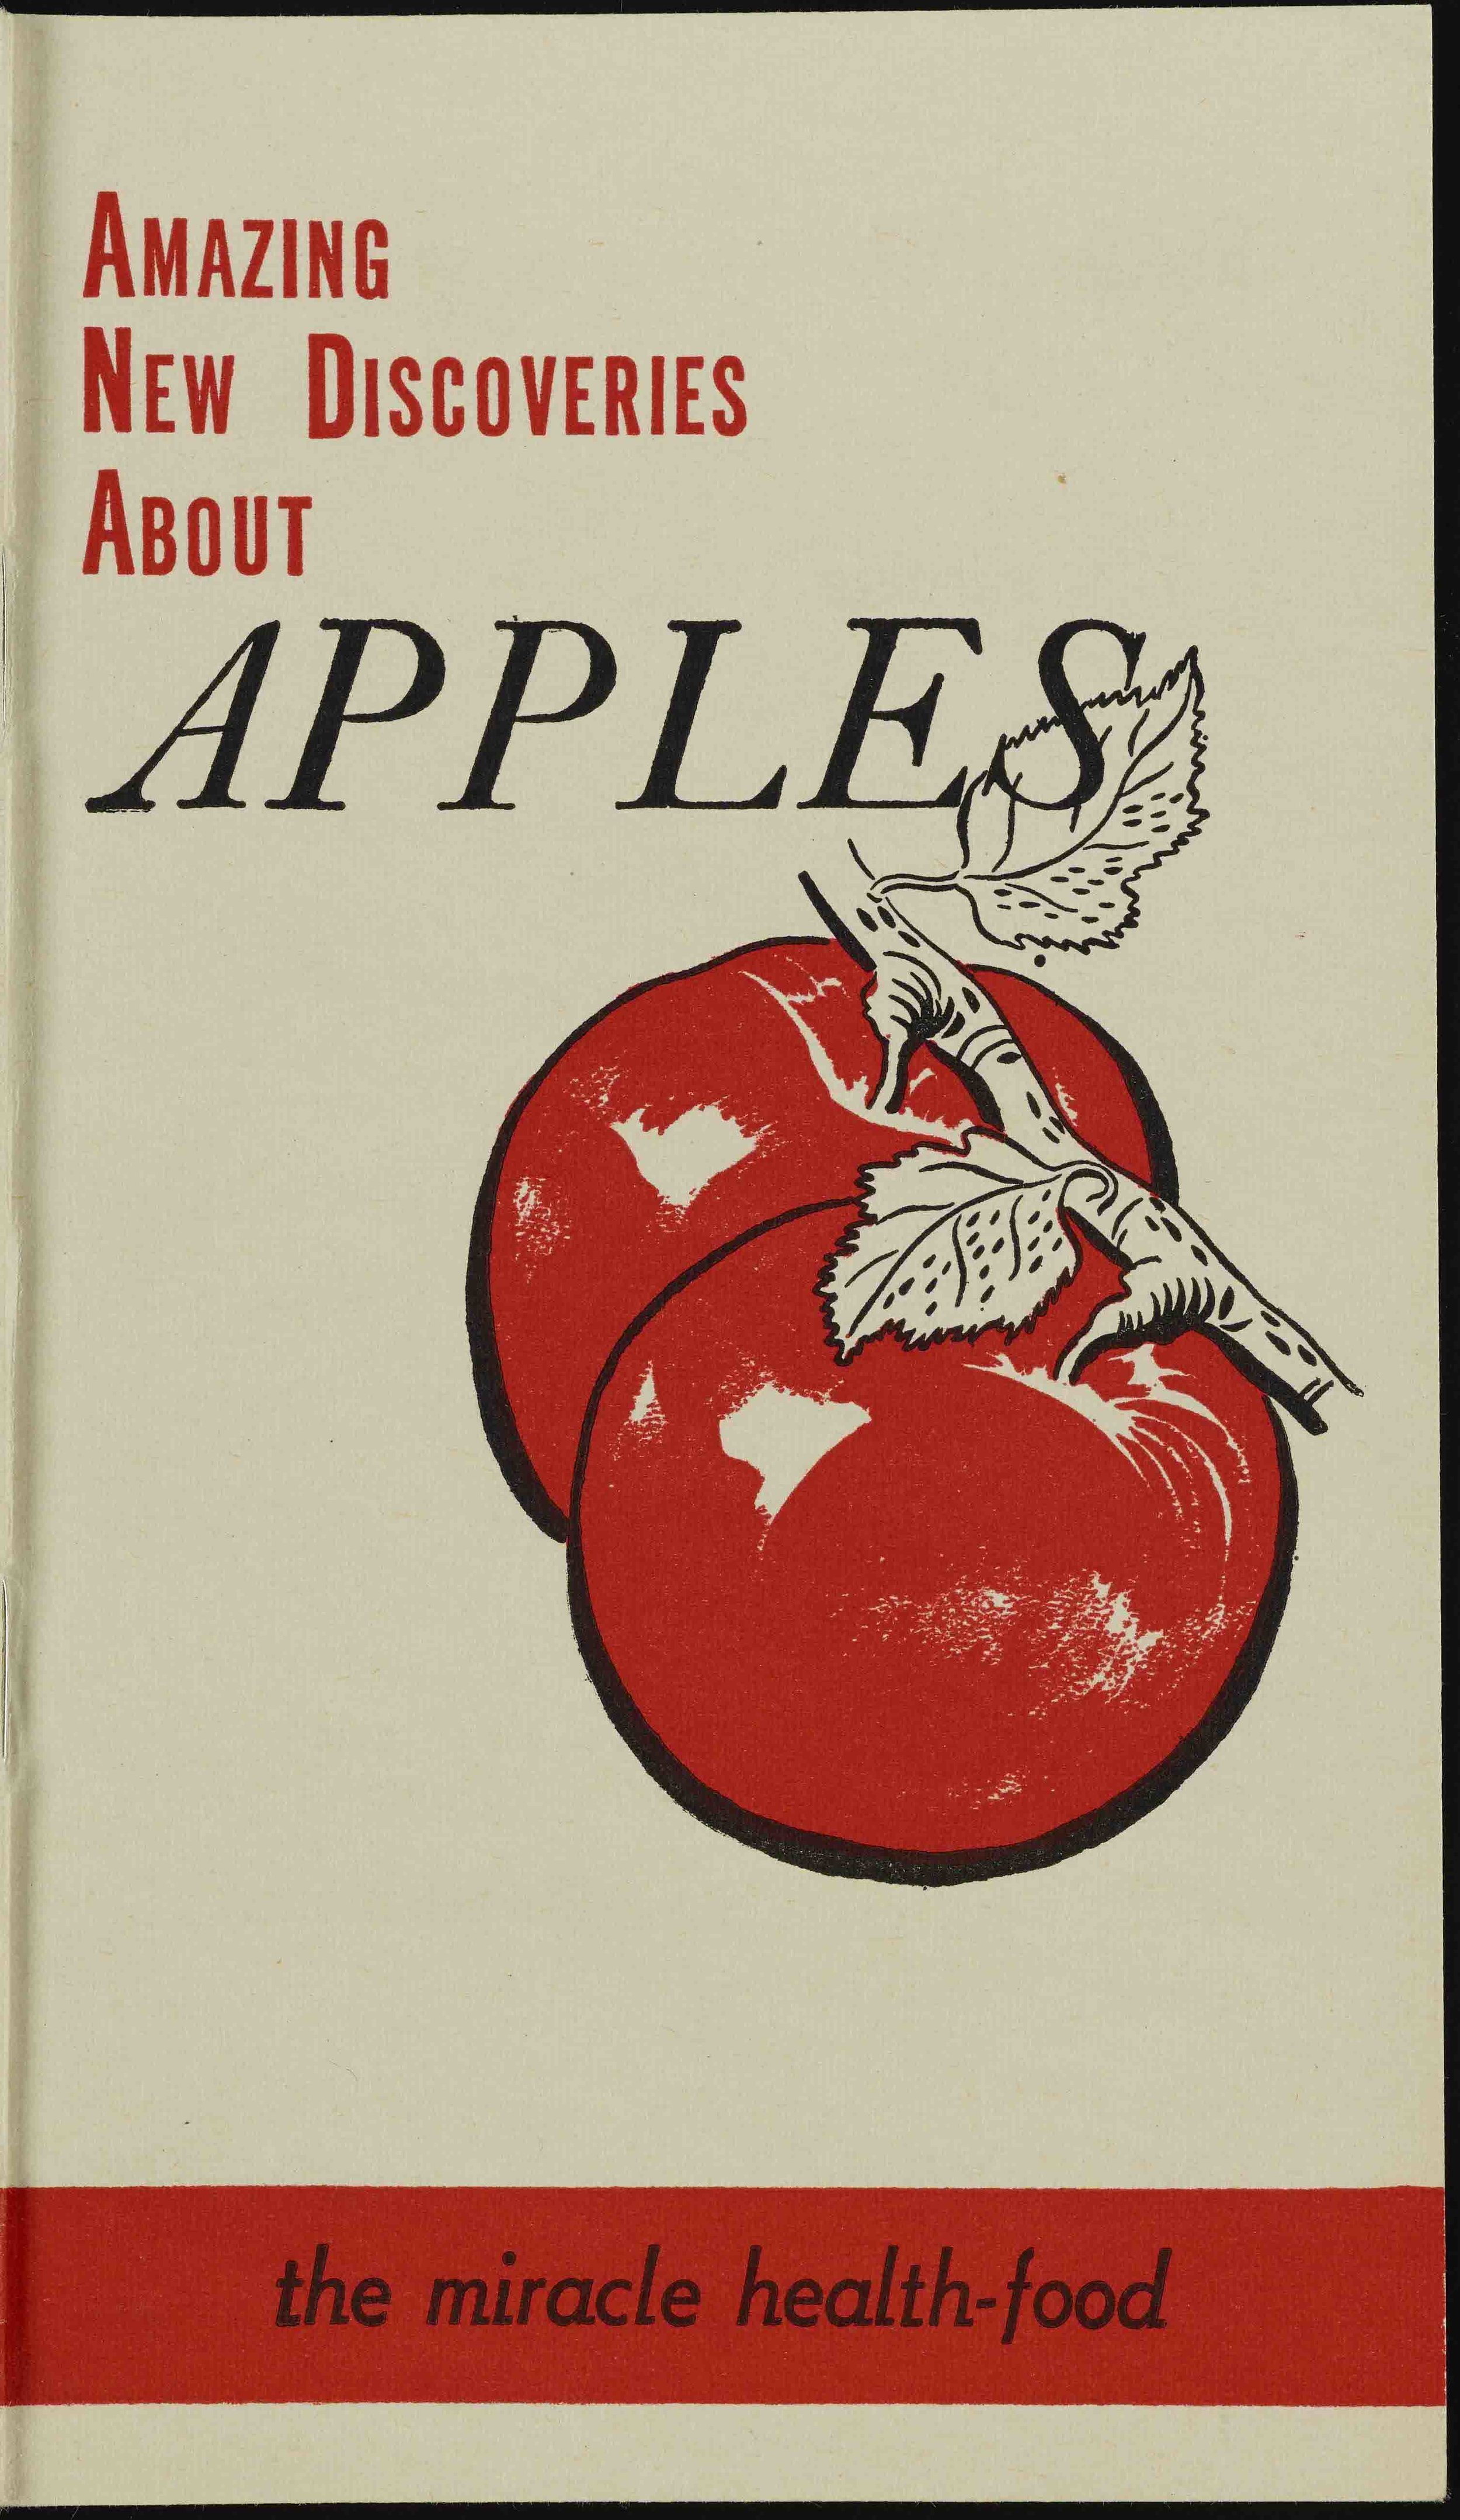 Miracle of Apples, New York and New England Apple Institute Inc.